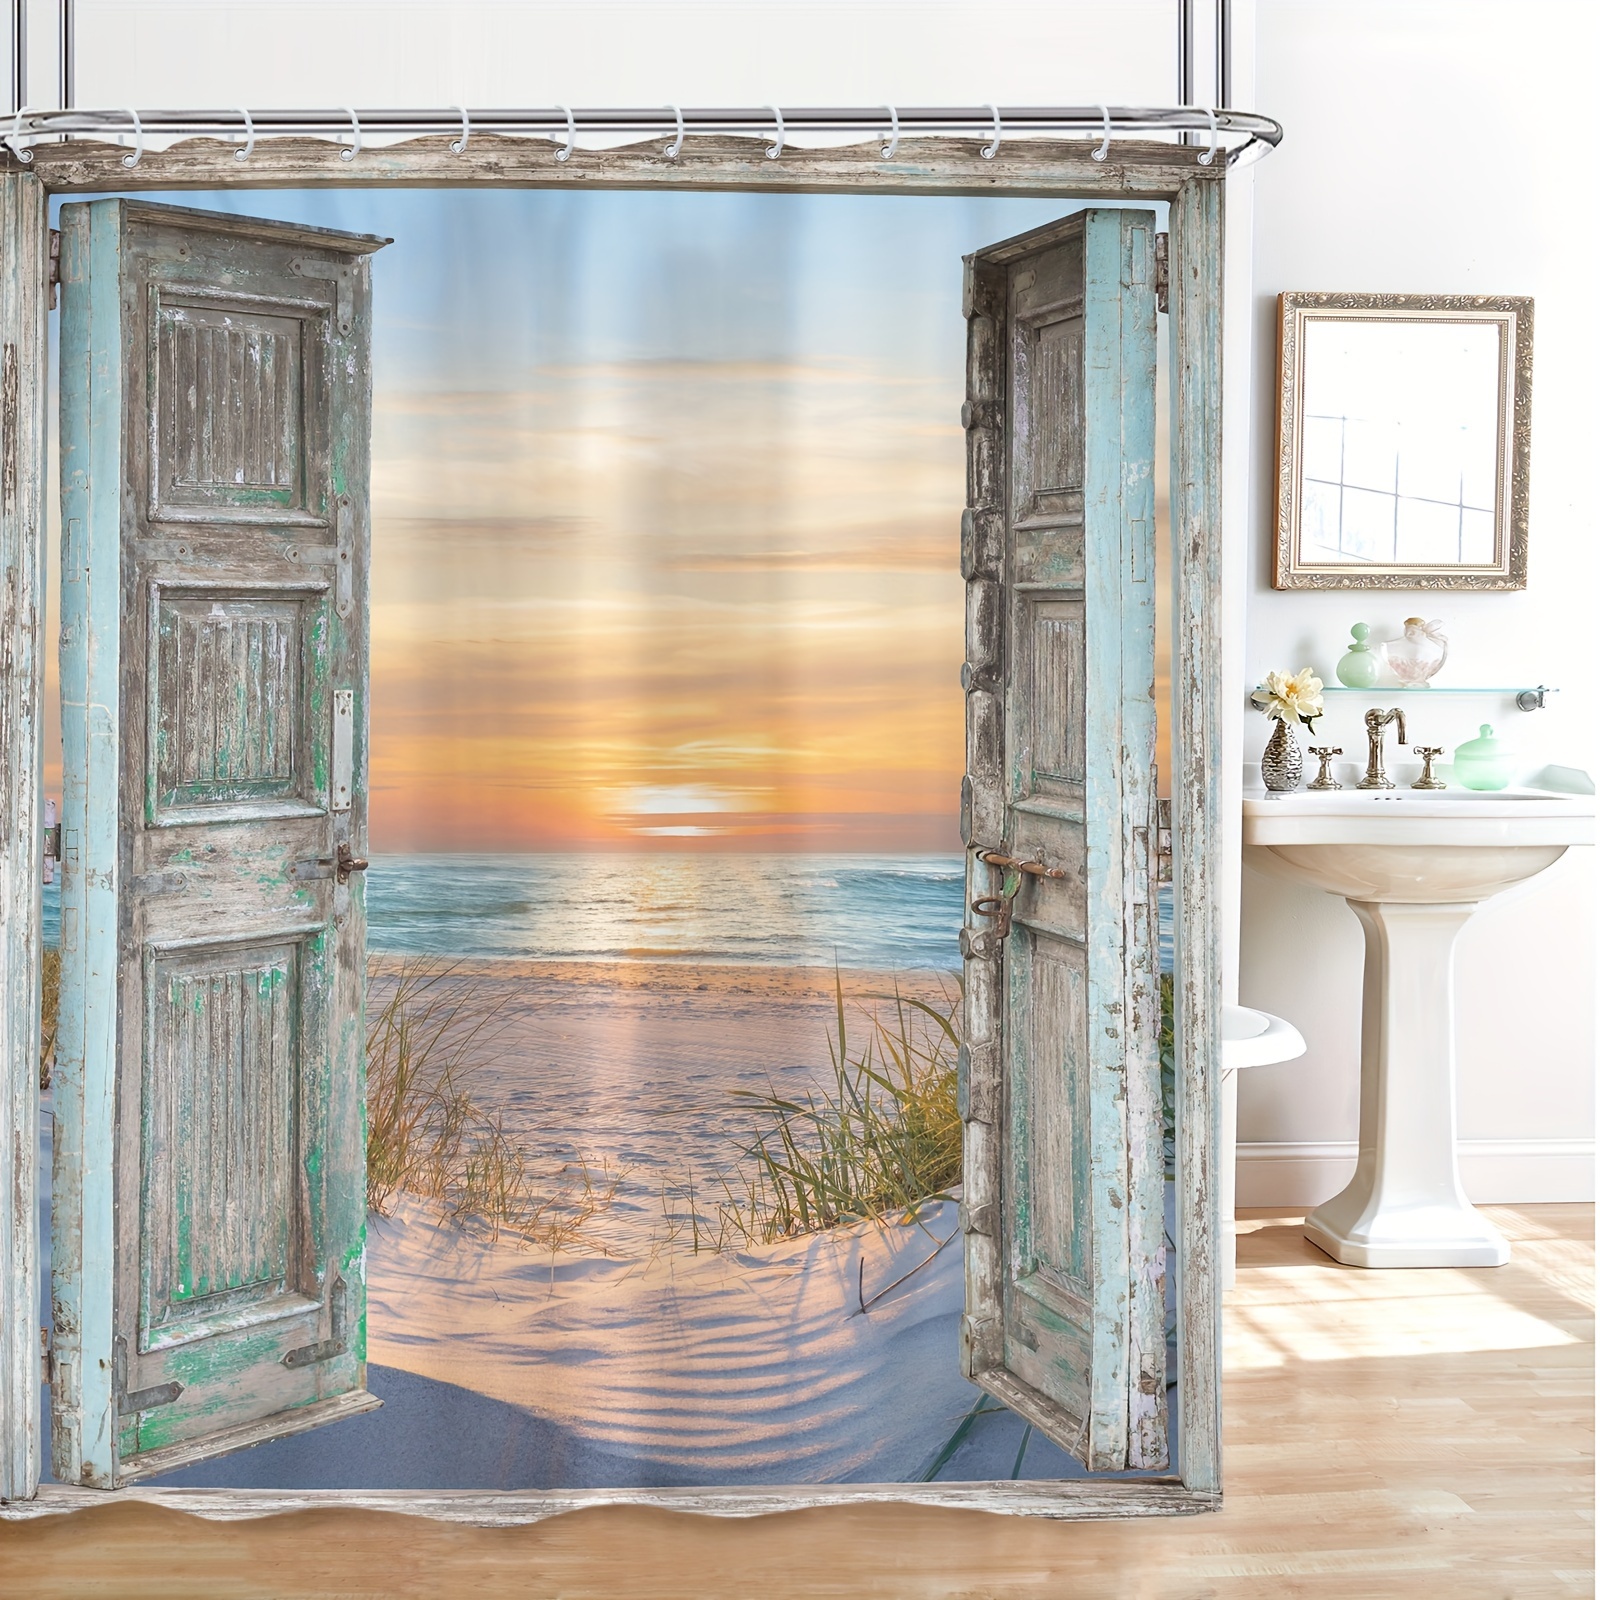 

1pc Beach Sunset Pattern, Waterproof Bathroom Partition Curtain With Hooks, Bathroom Accessories, Home Decor